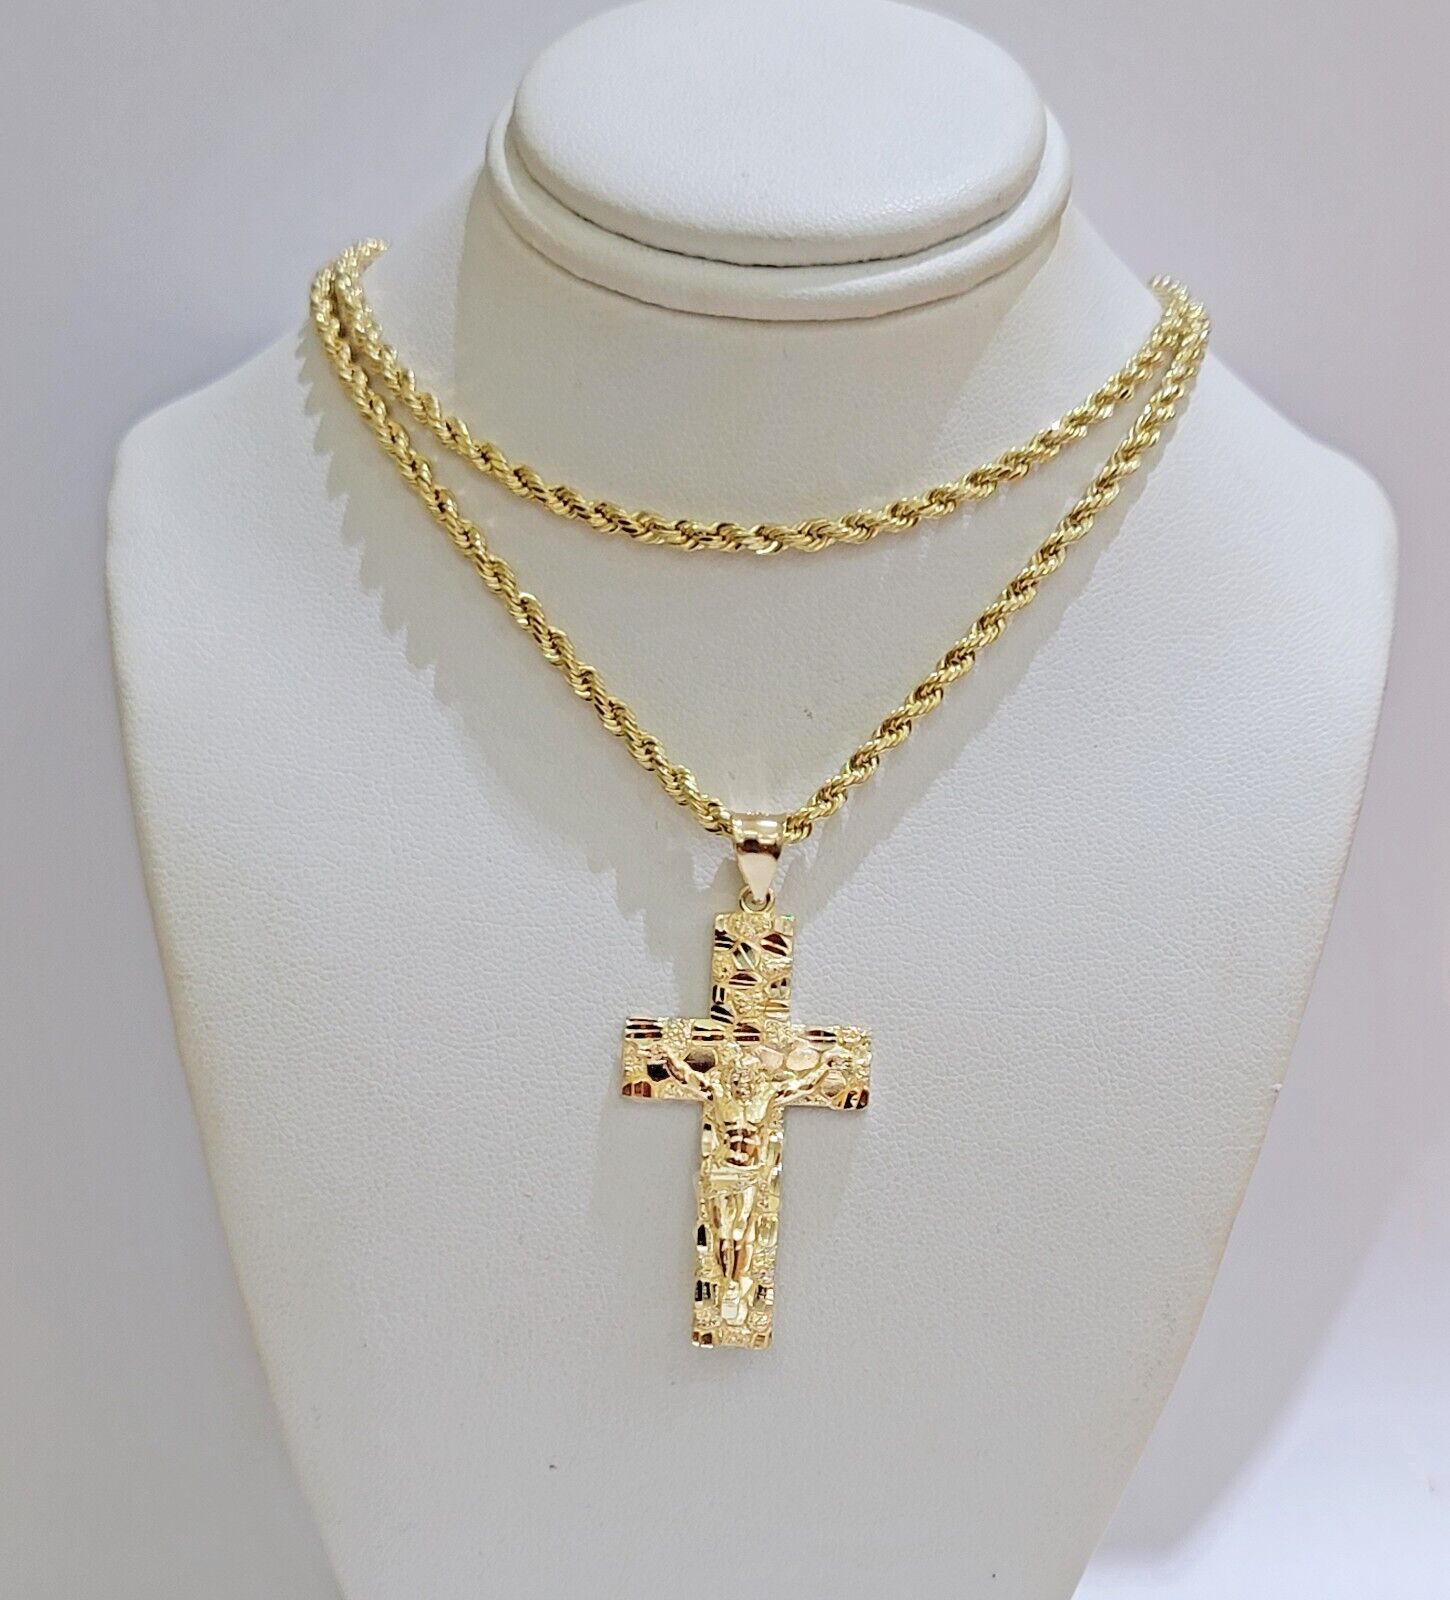 10k Yellow Gold Rope Chain Nugget Cross Charm Set 24 Inch necklace pendant, REAL